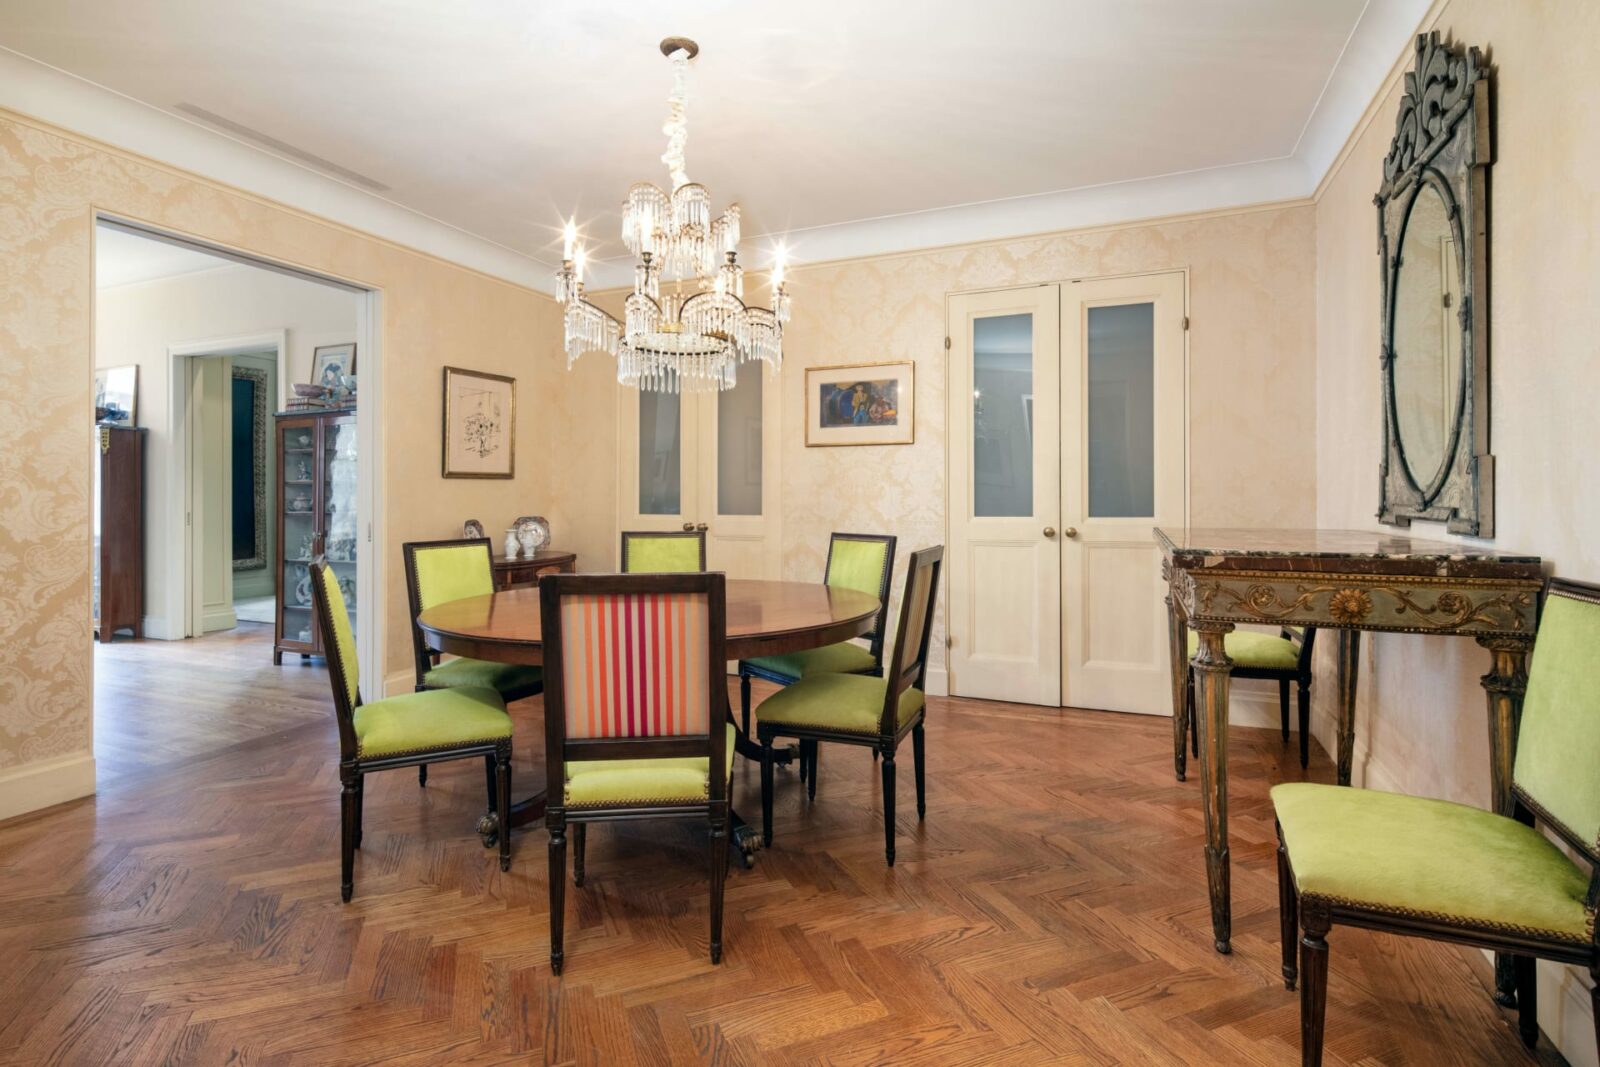 Interior view of a dining room with herringbone flooring